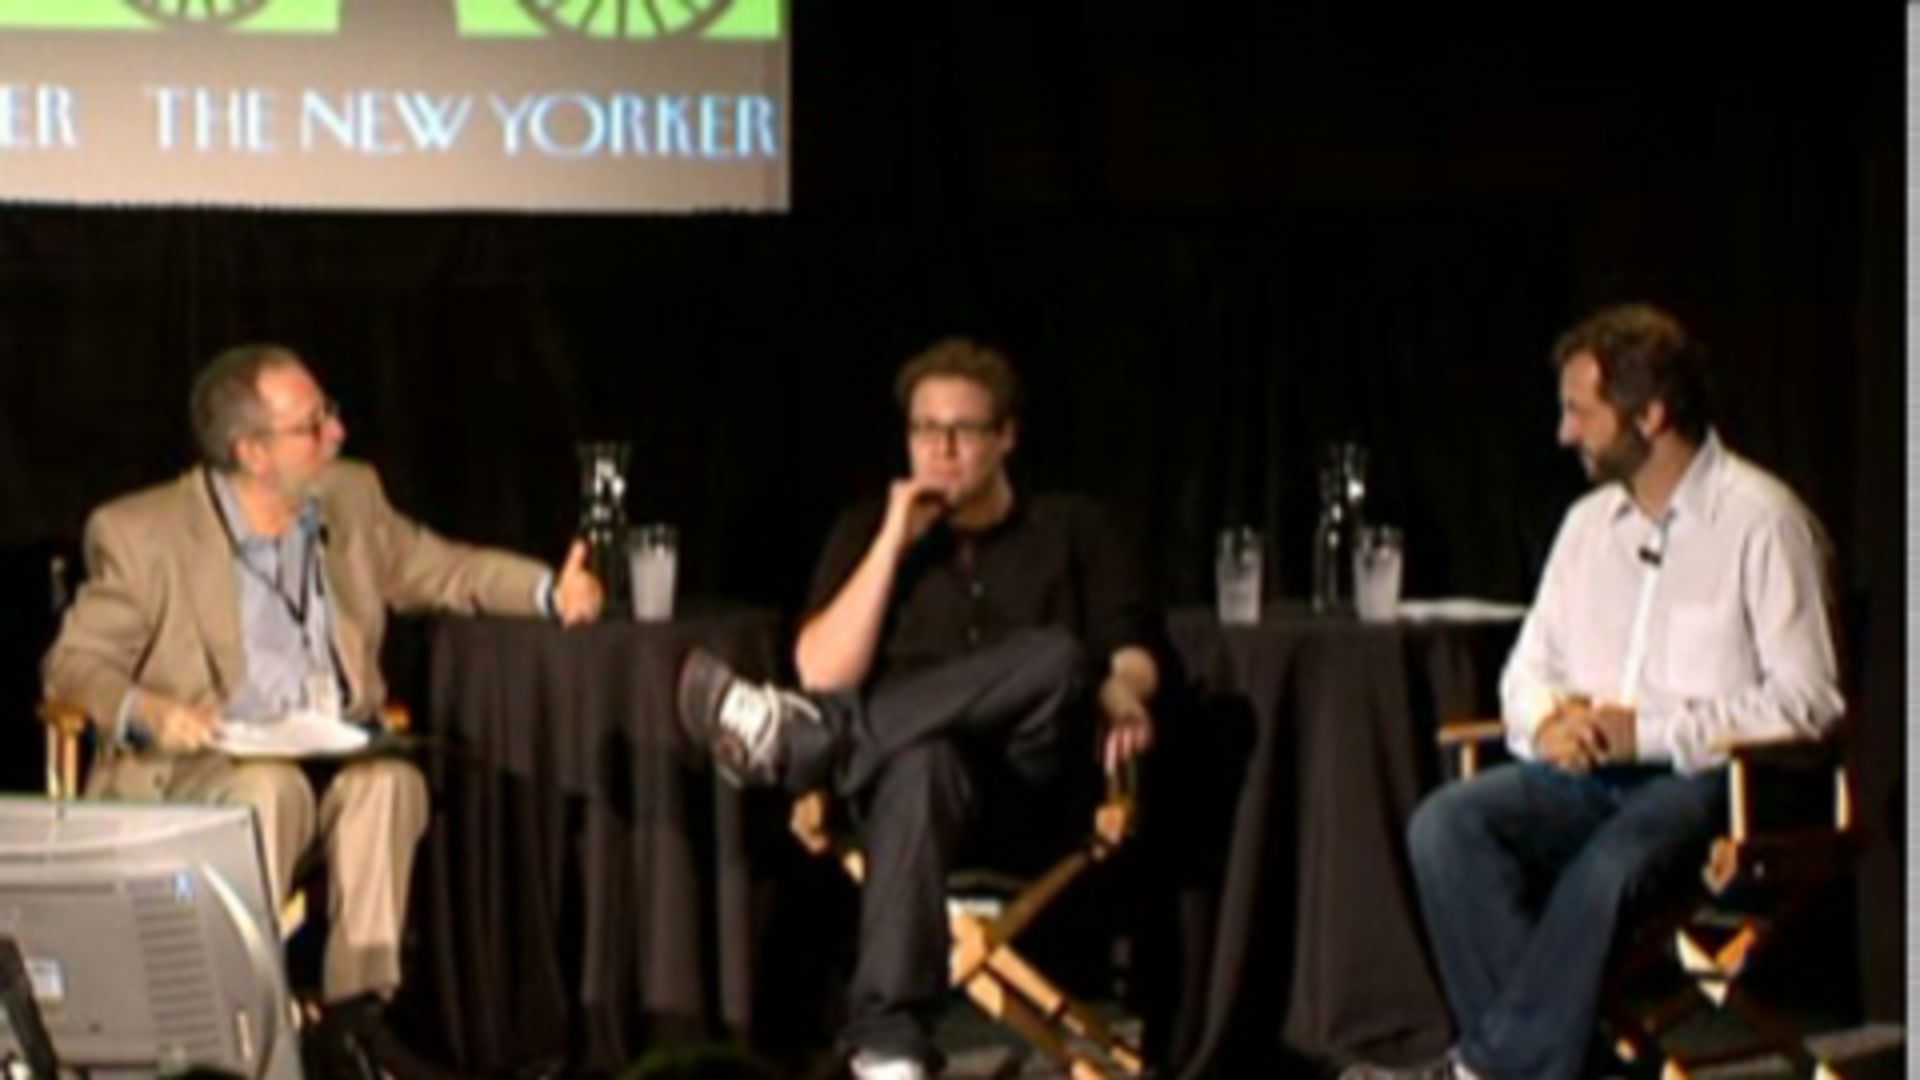 Watch Judd Apatow and Seth Rogen, with David Denby New Yorker Festival The New Yorker image